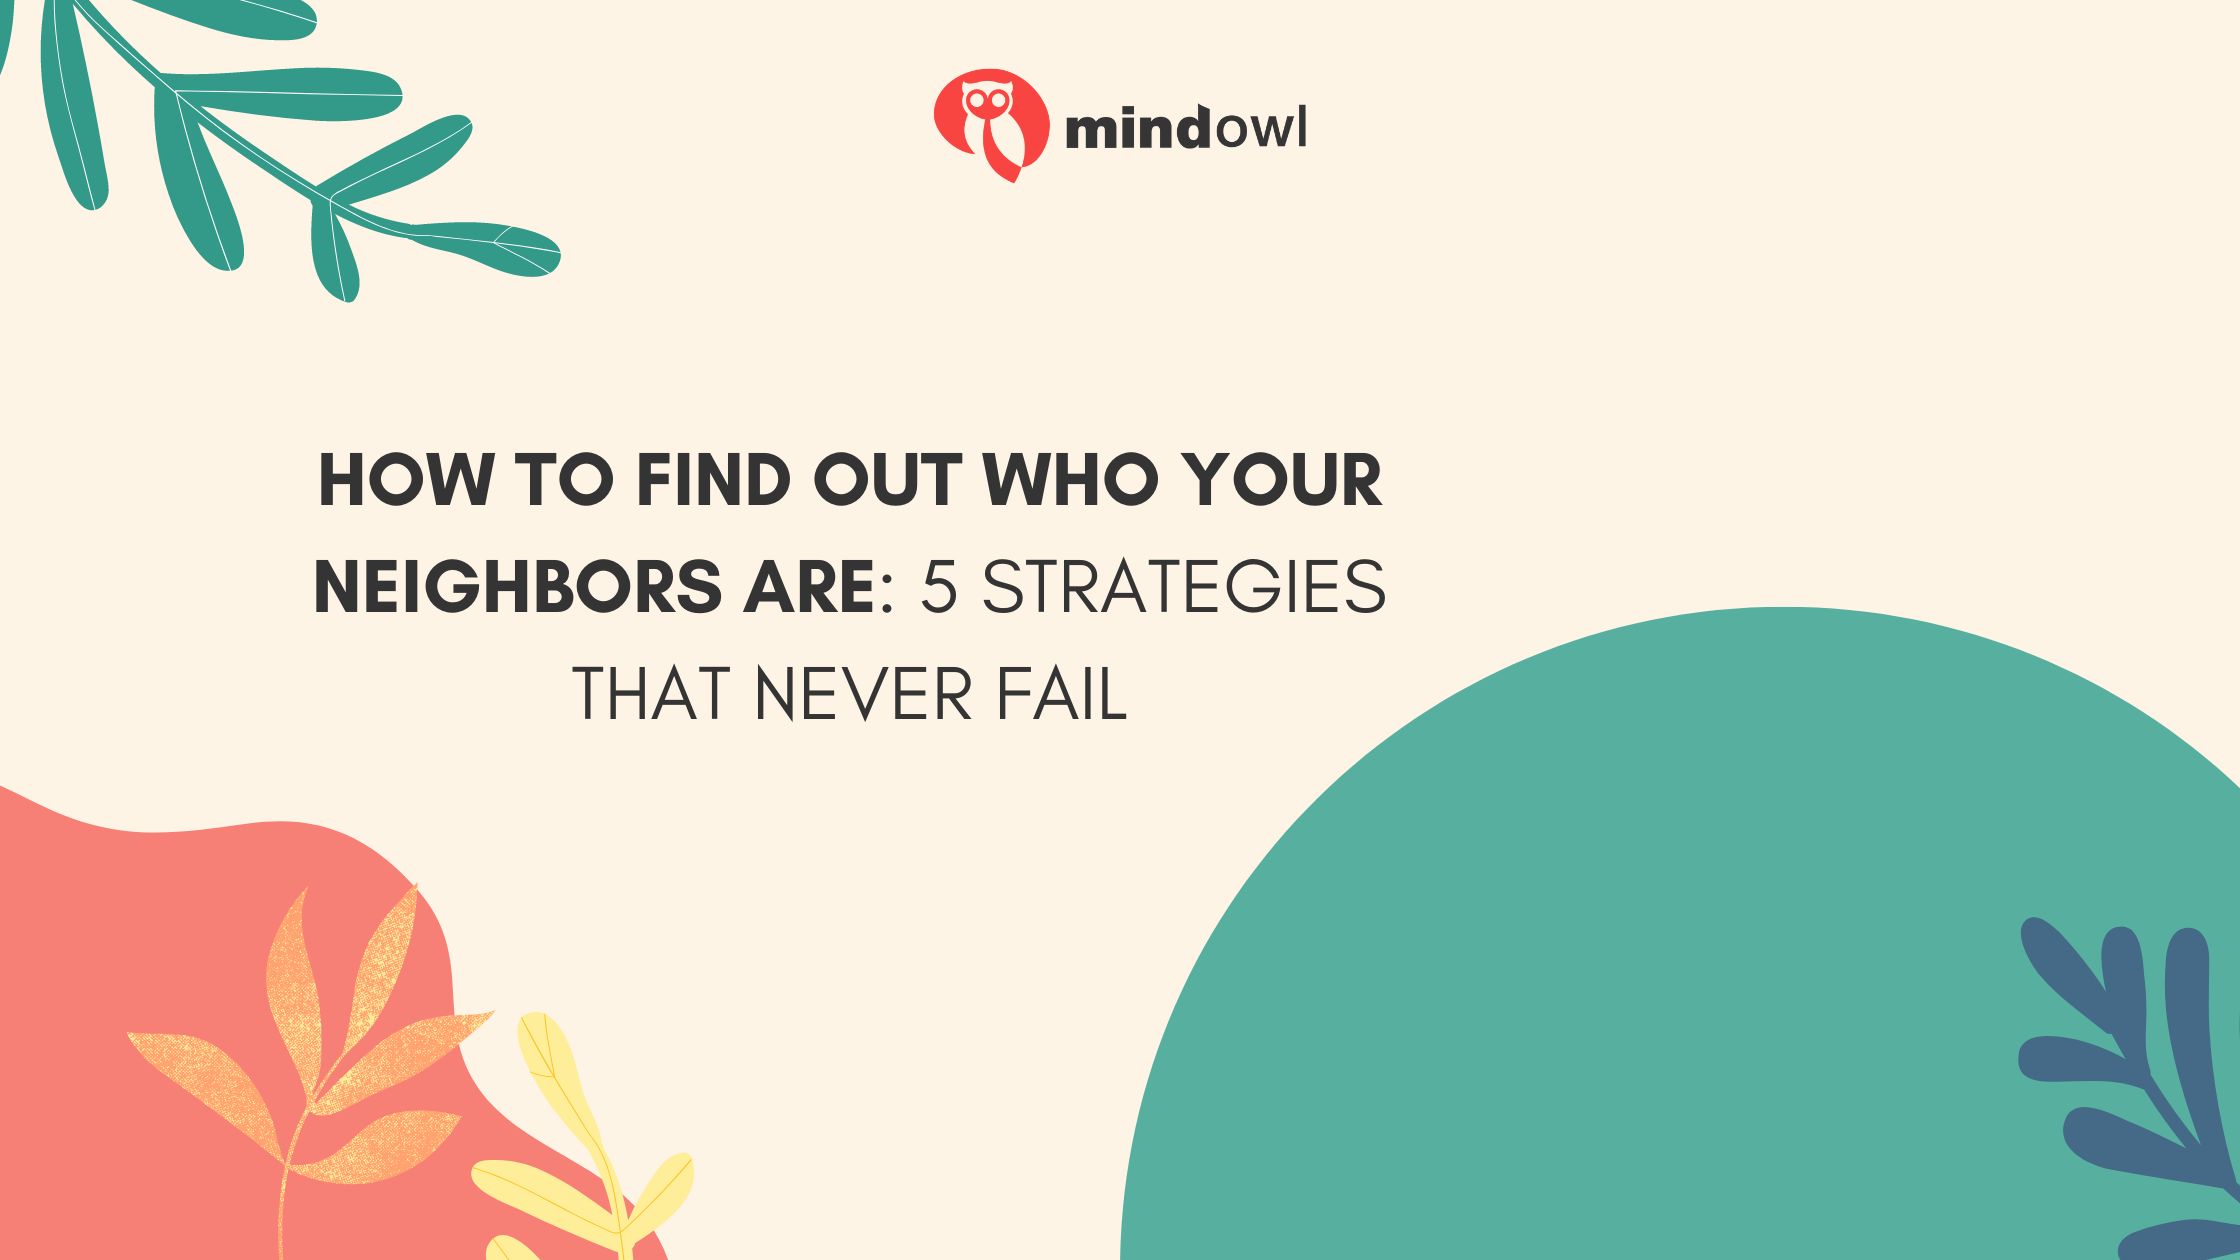 How to Find Out Who Your Neighbors Are: 5 Strategies That Never Fail